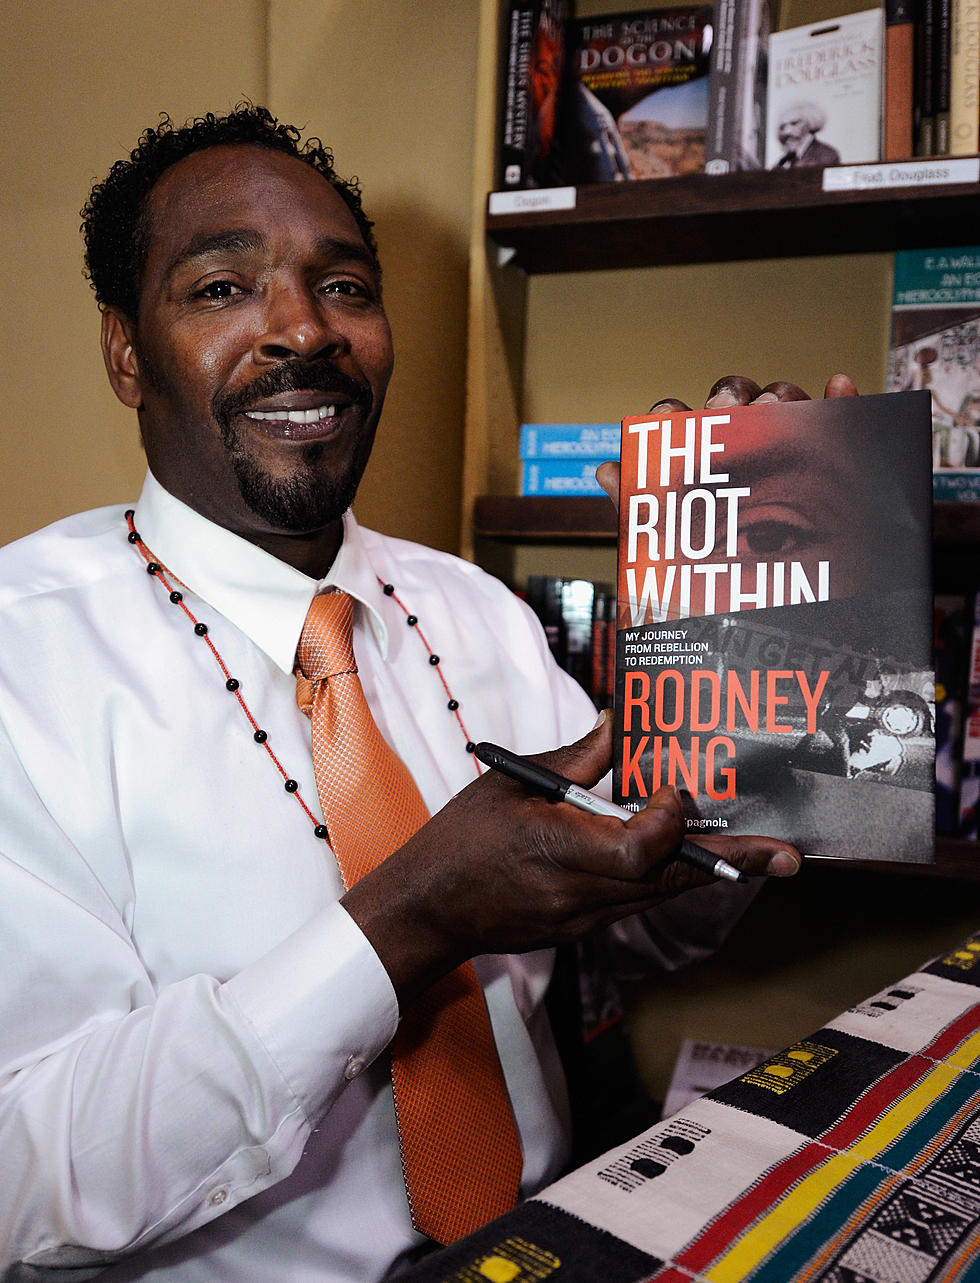 Foul Play in Rodney King’s Death?